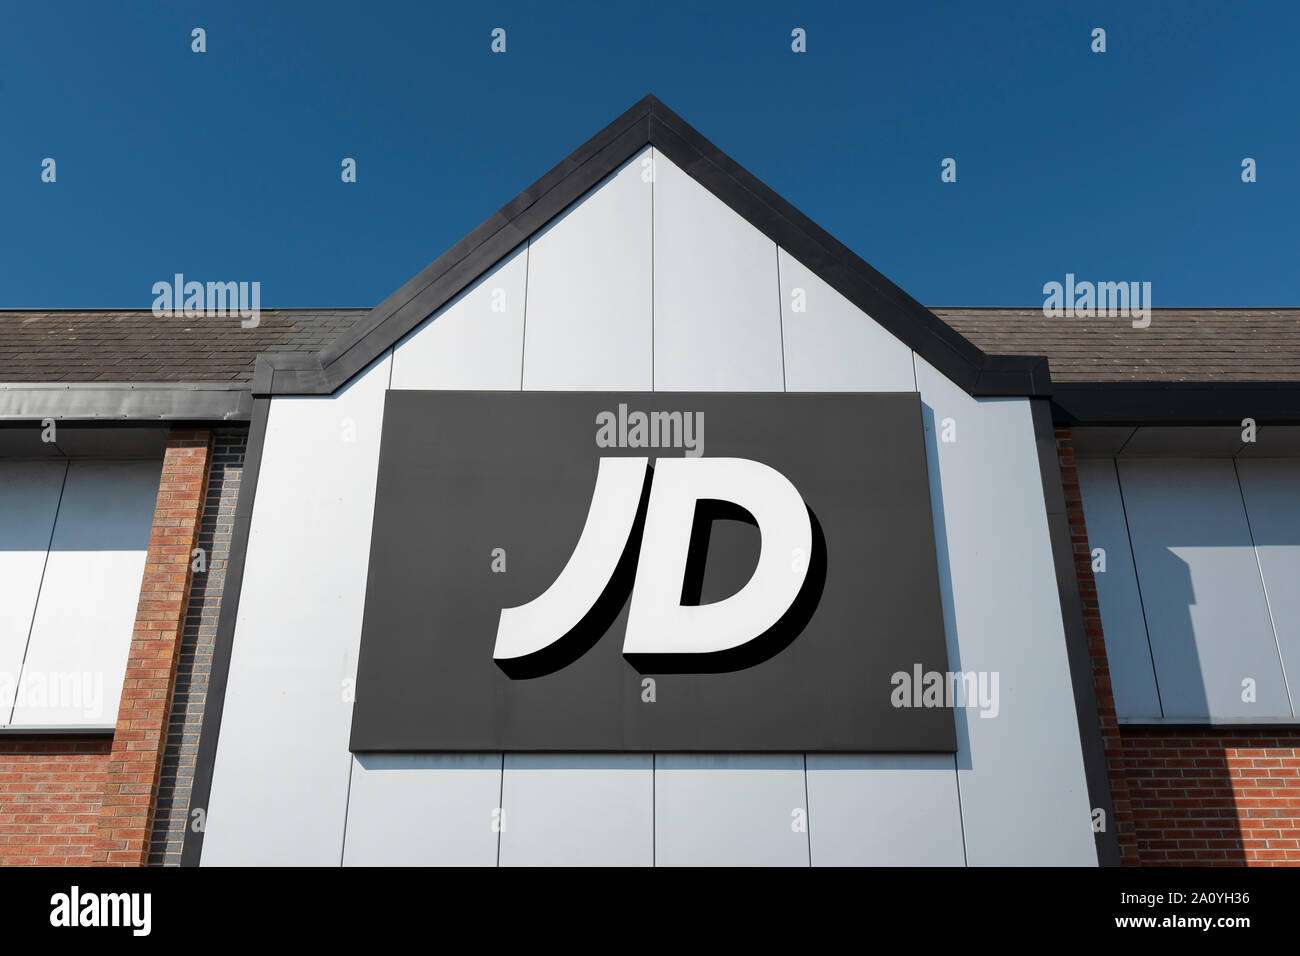 Signage indicating a branch of the sports retailer JD Sports. Stock Photo